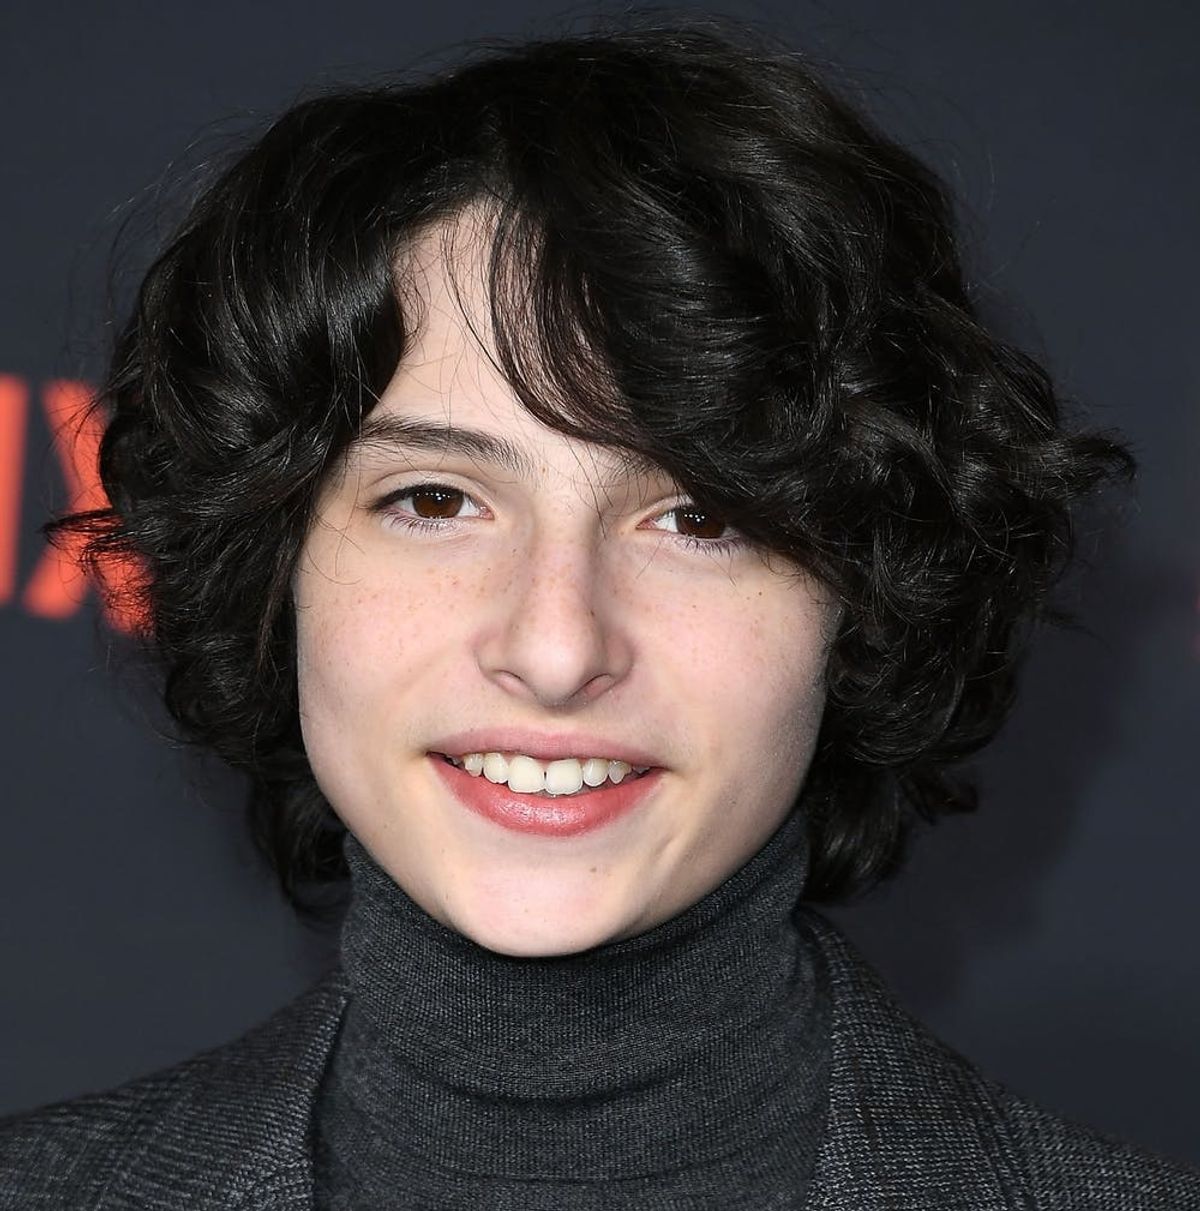 This Model’s Joke About Child Actor Finn Wolfhard Is Completely Grossing Fans Out